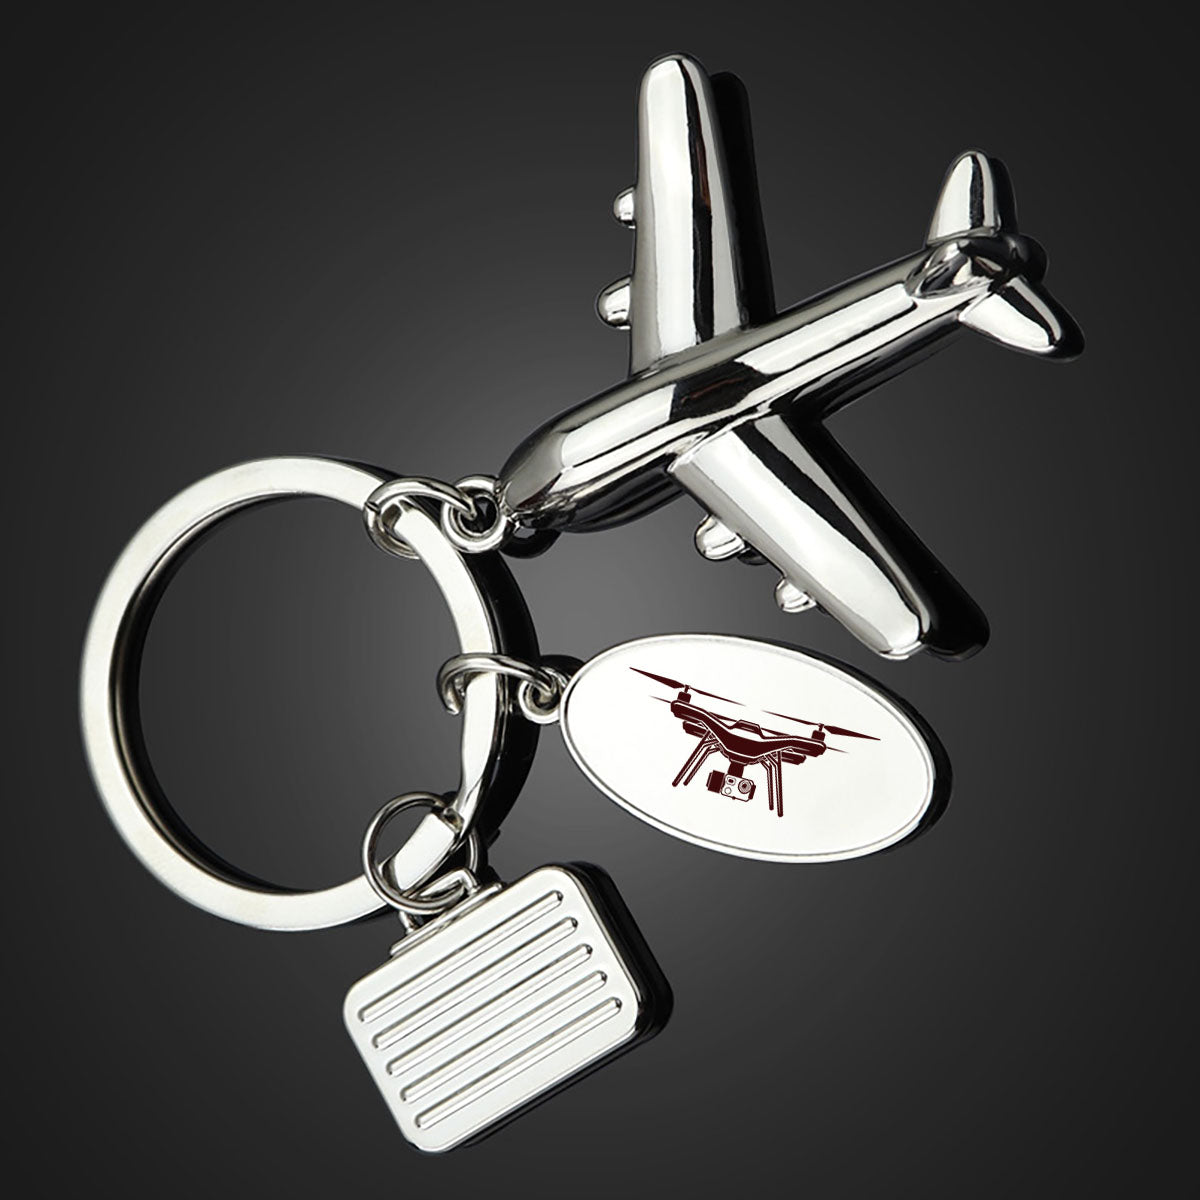 Drone Silhouette Designed Suitcase Airplane Key Chains